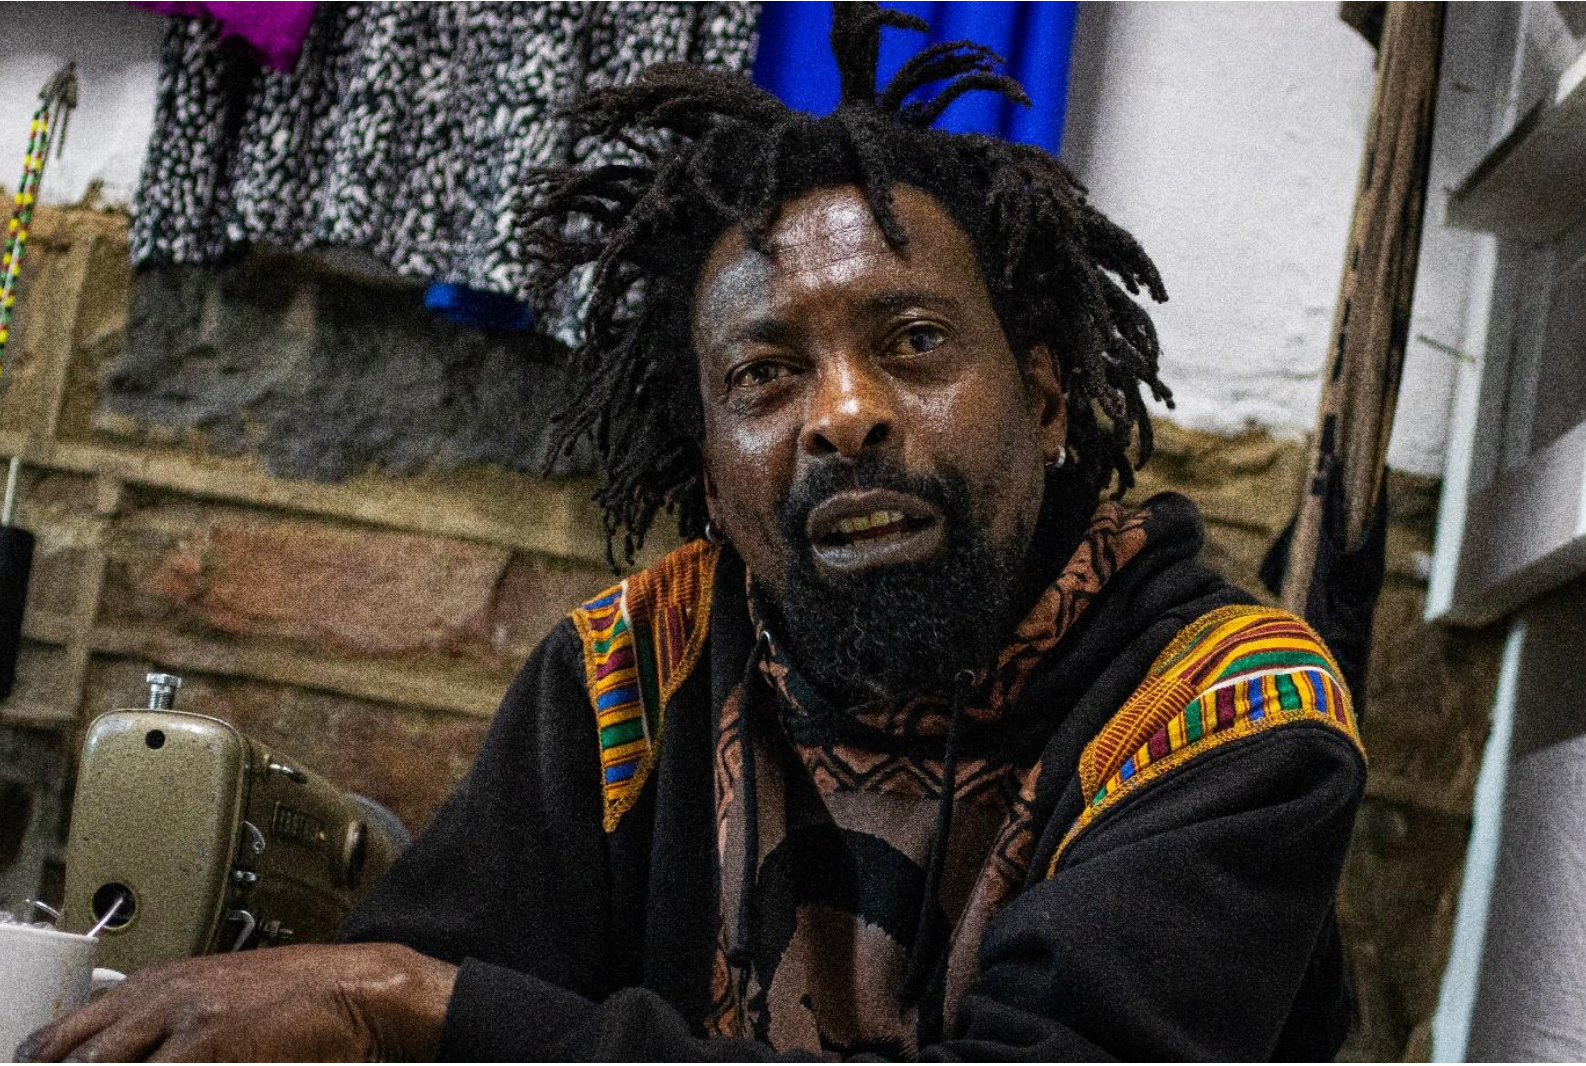 Isaias Tiyane talks about his work during an interview at his clothing store on Dundas, where he operates. Photo: Siqhamo Jama